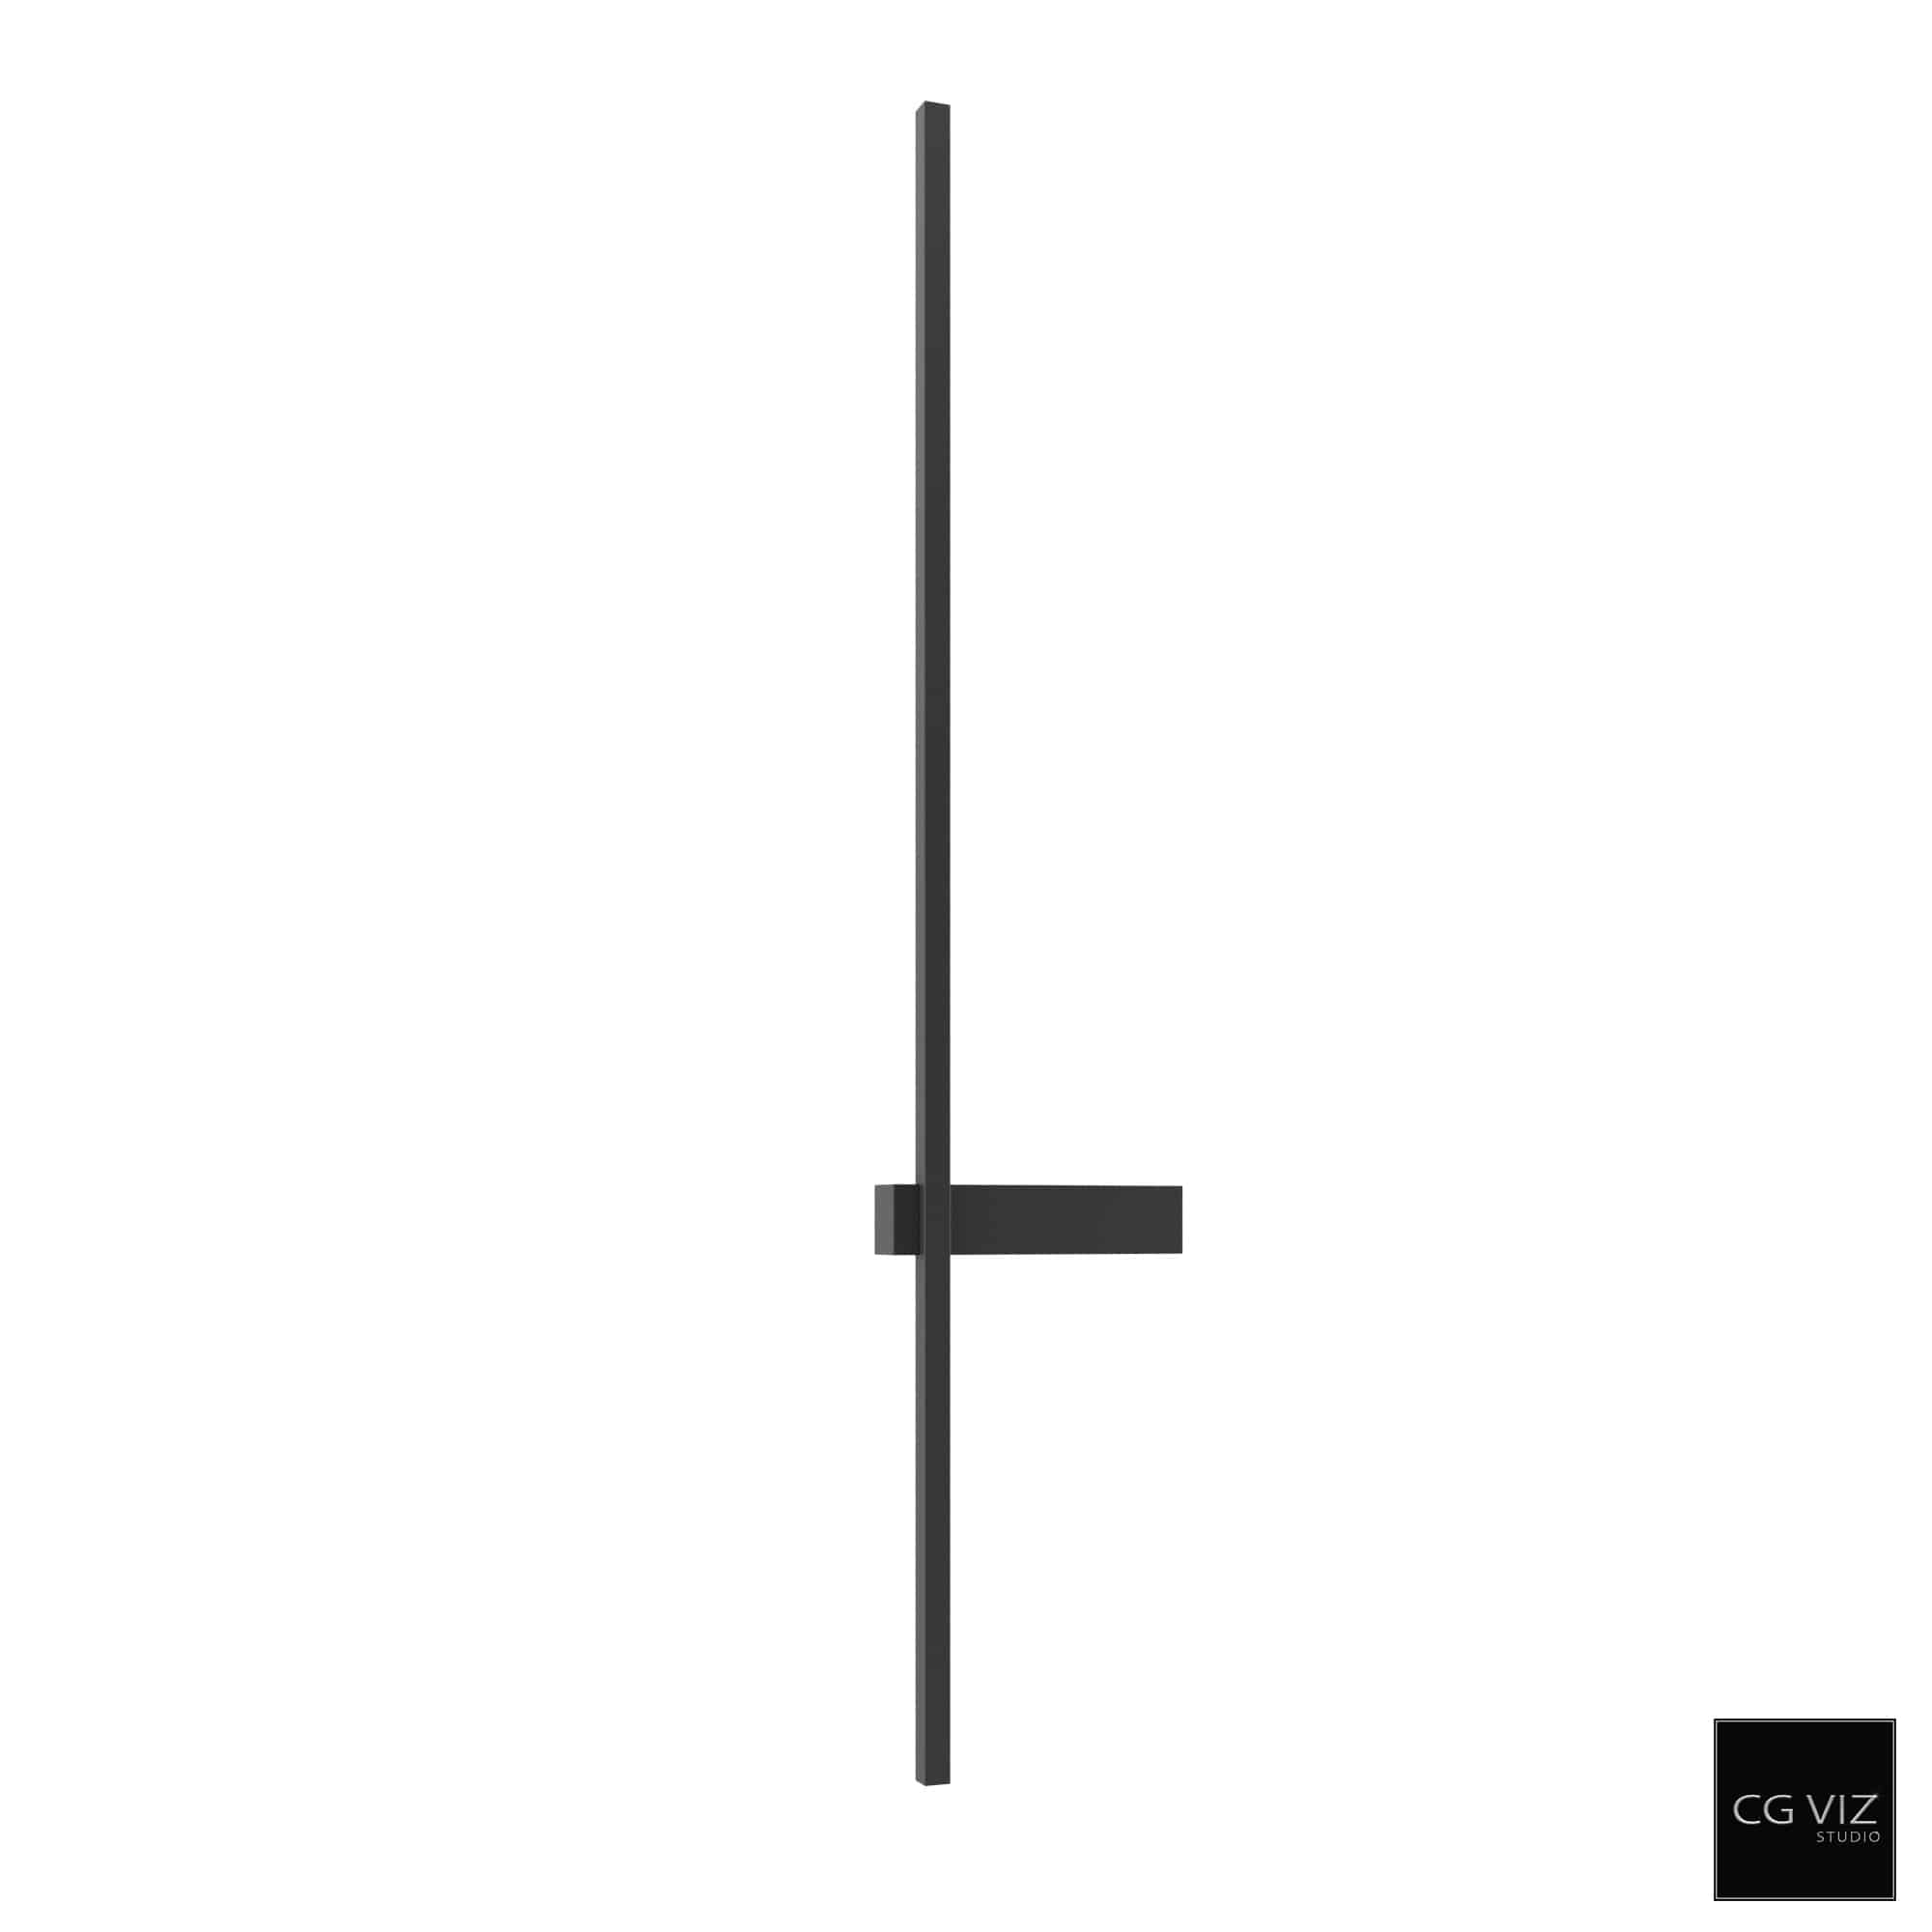 Rendered Preview of Litfad Linear Wall Light Sconce 3D Model